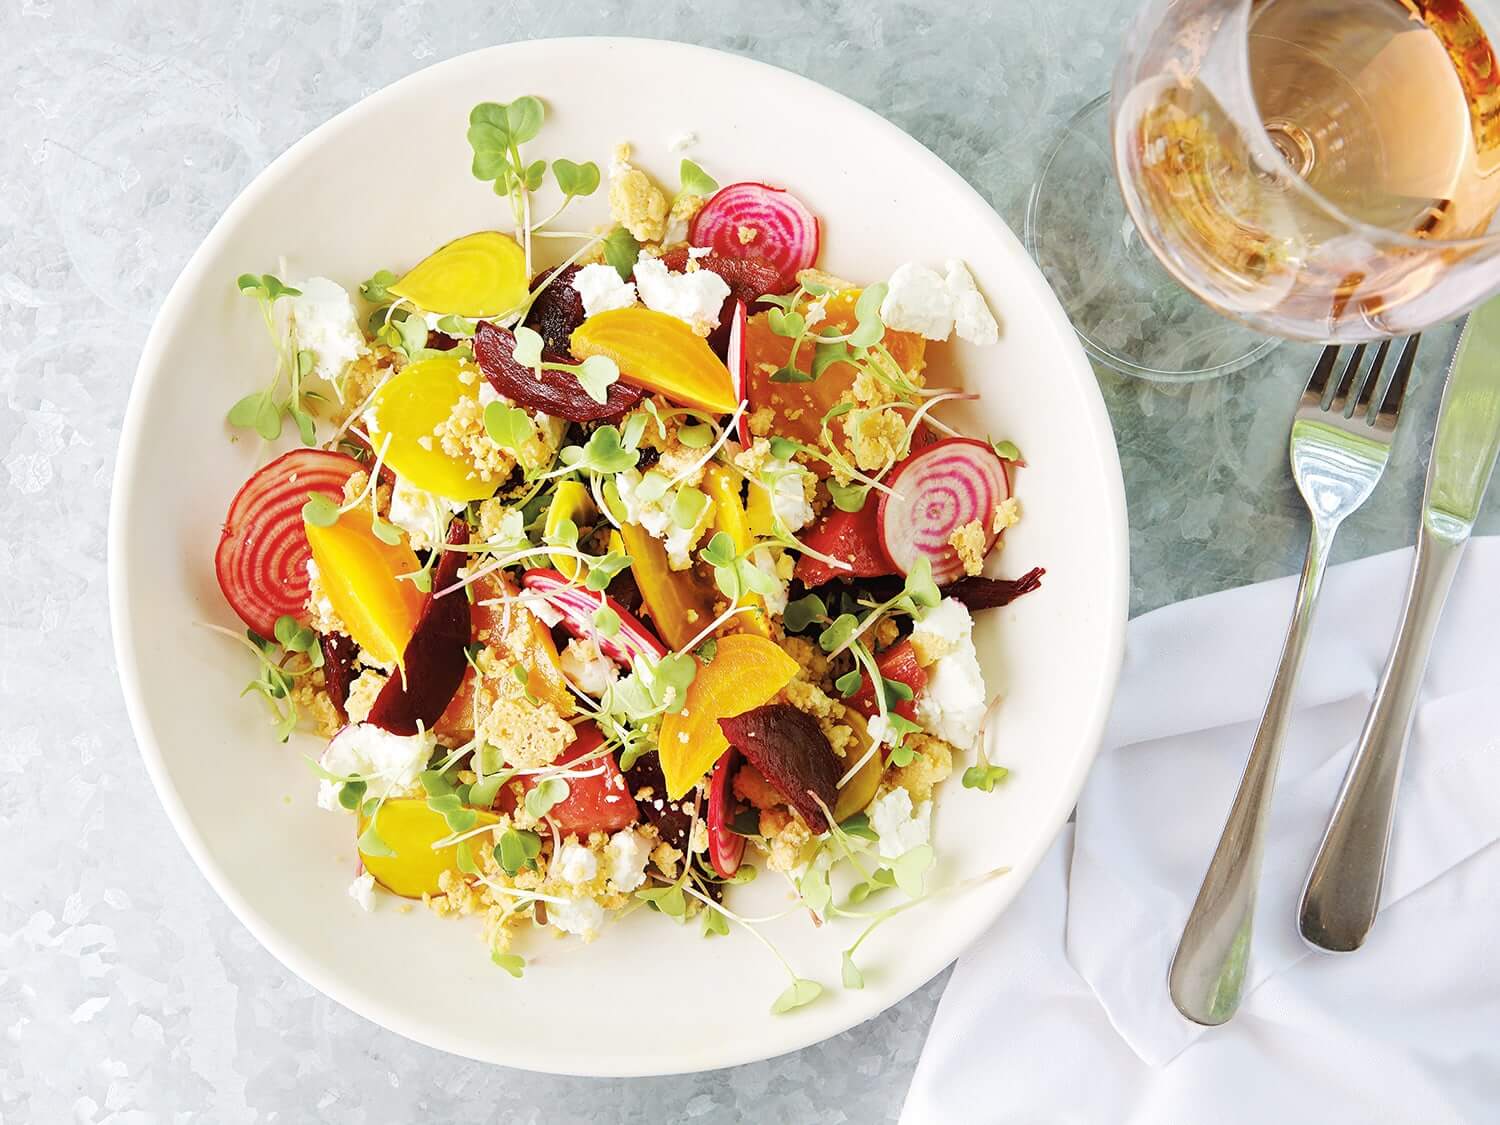 Bright and beautiful lunch salad. Photo by Elsa Young.